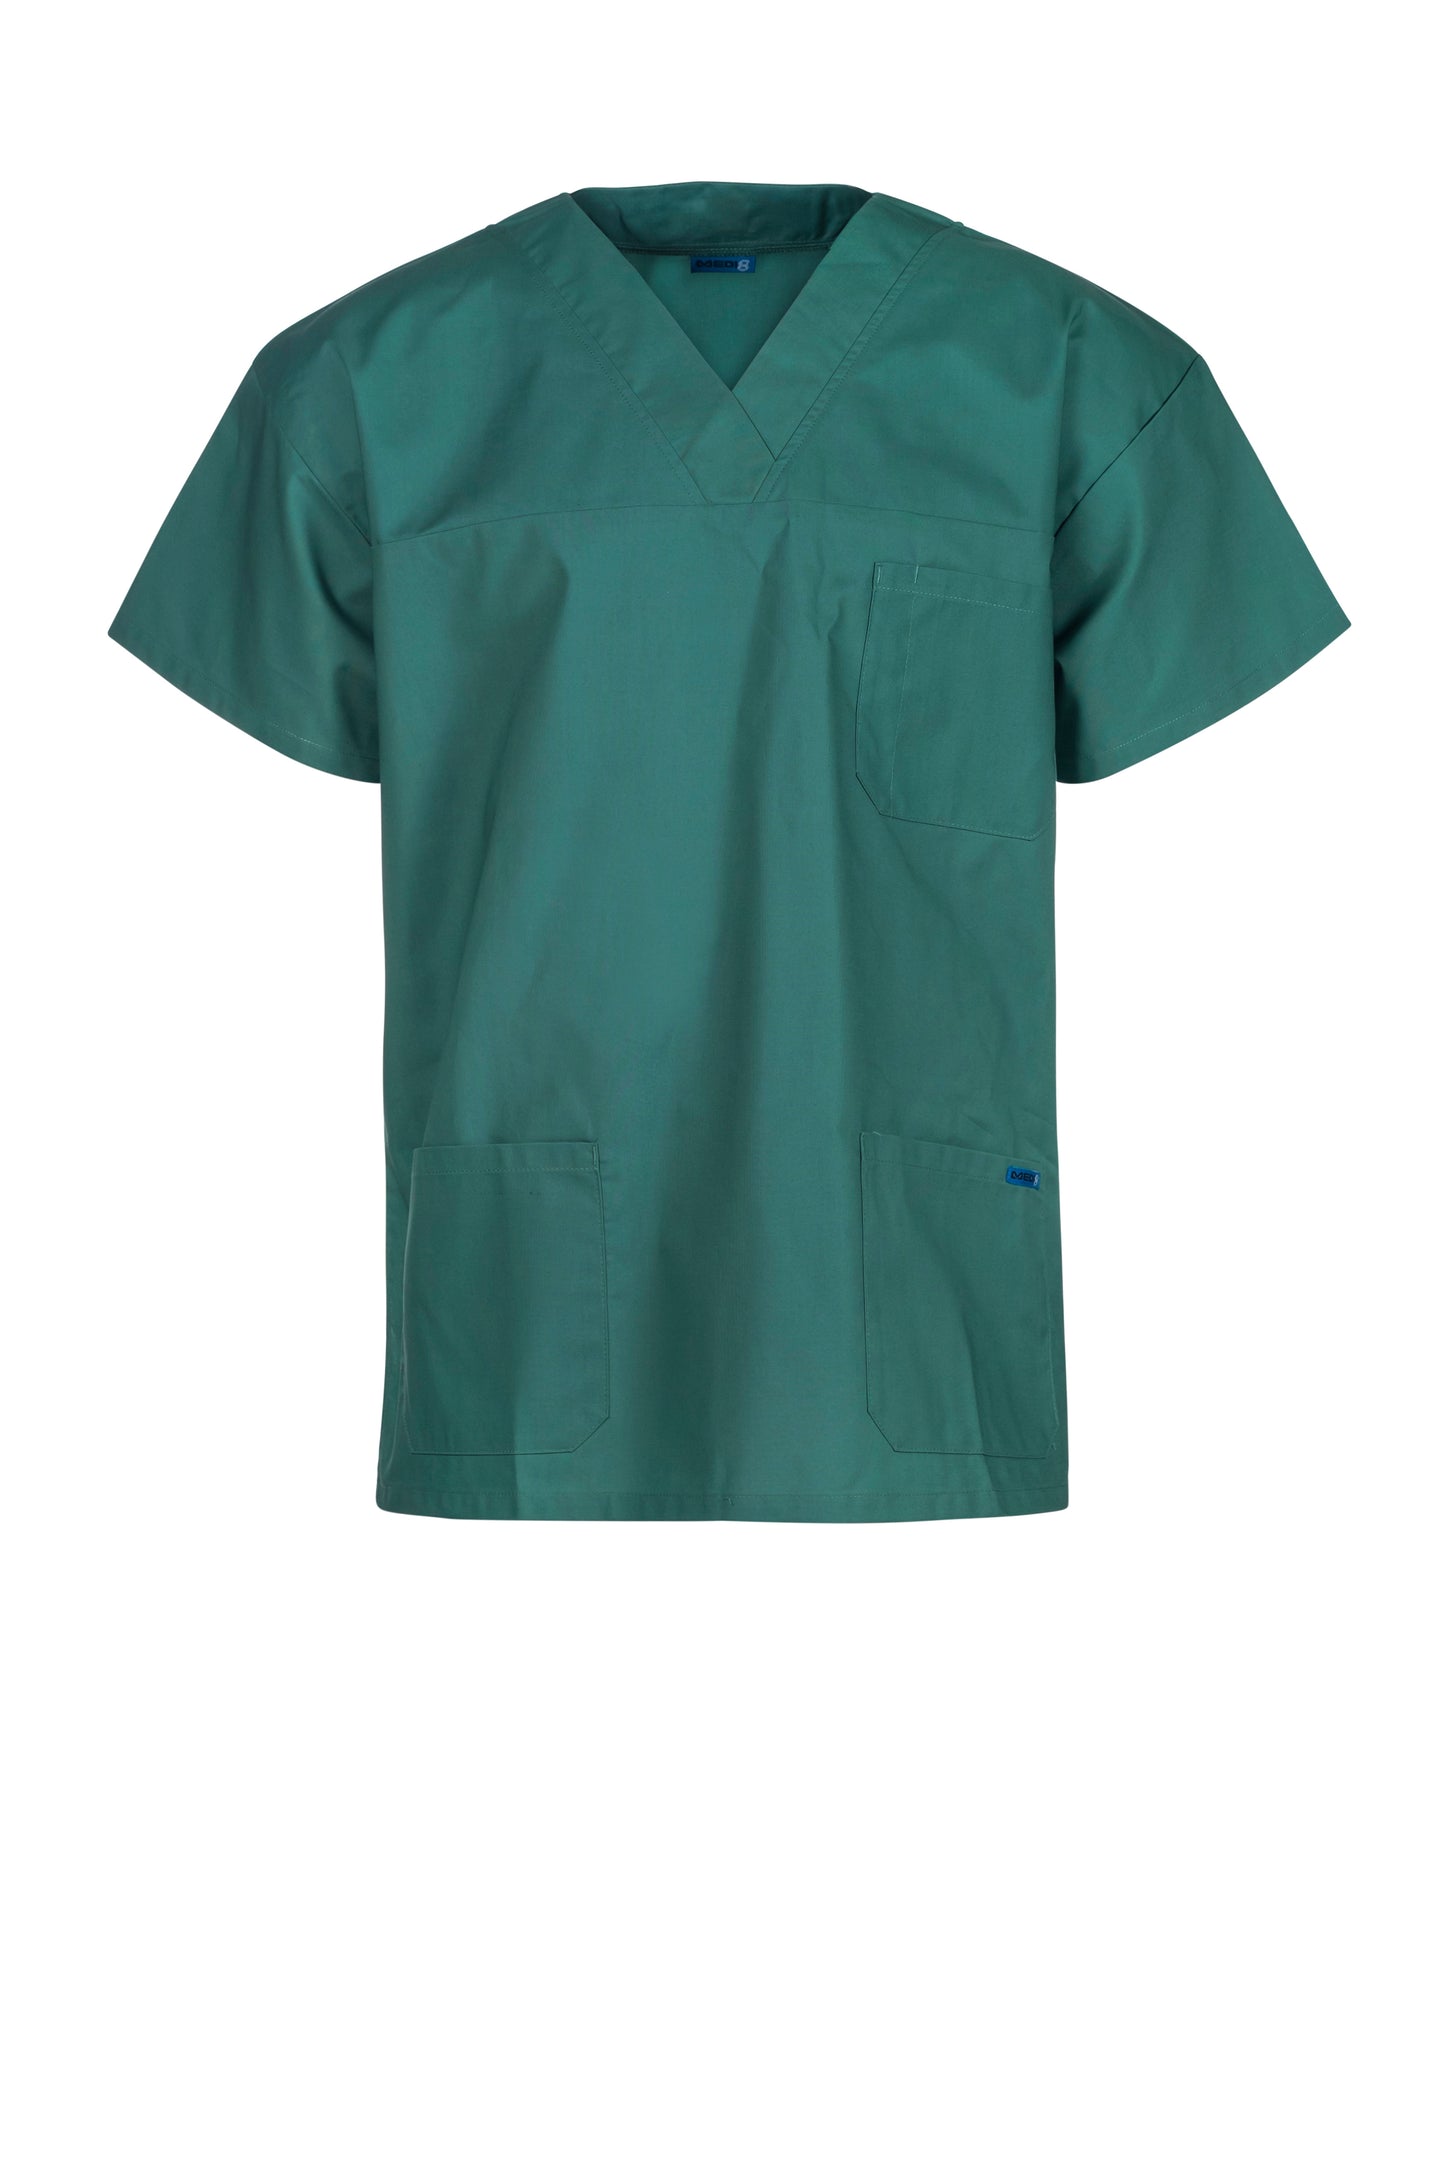 Unisex Scrub Top With Pockets - made by Medi8